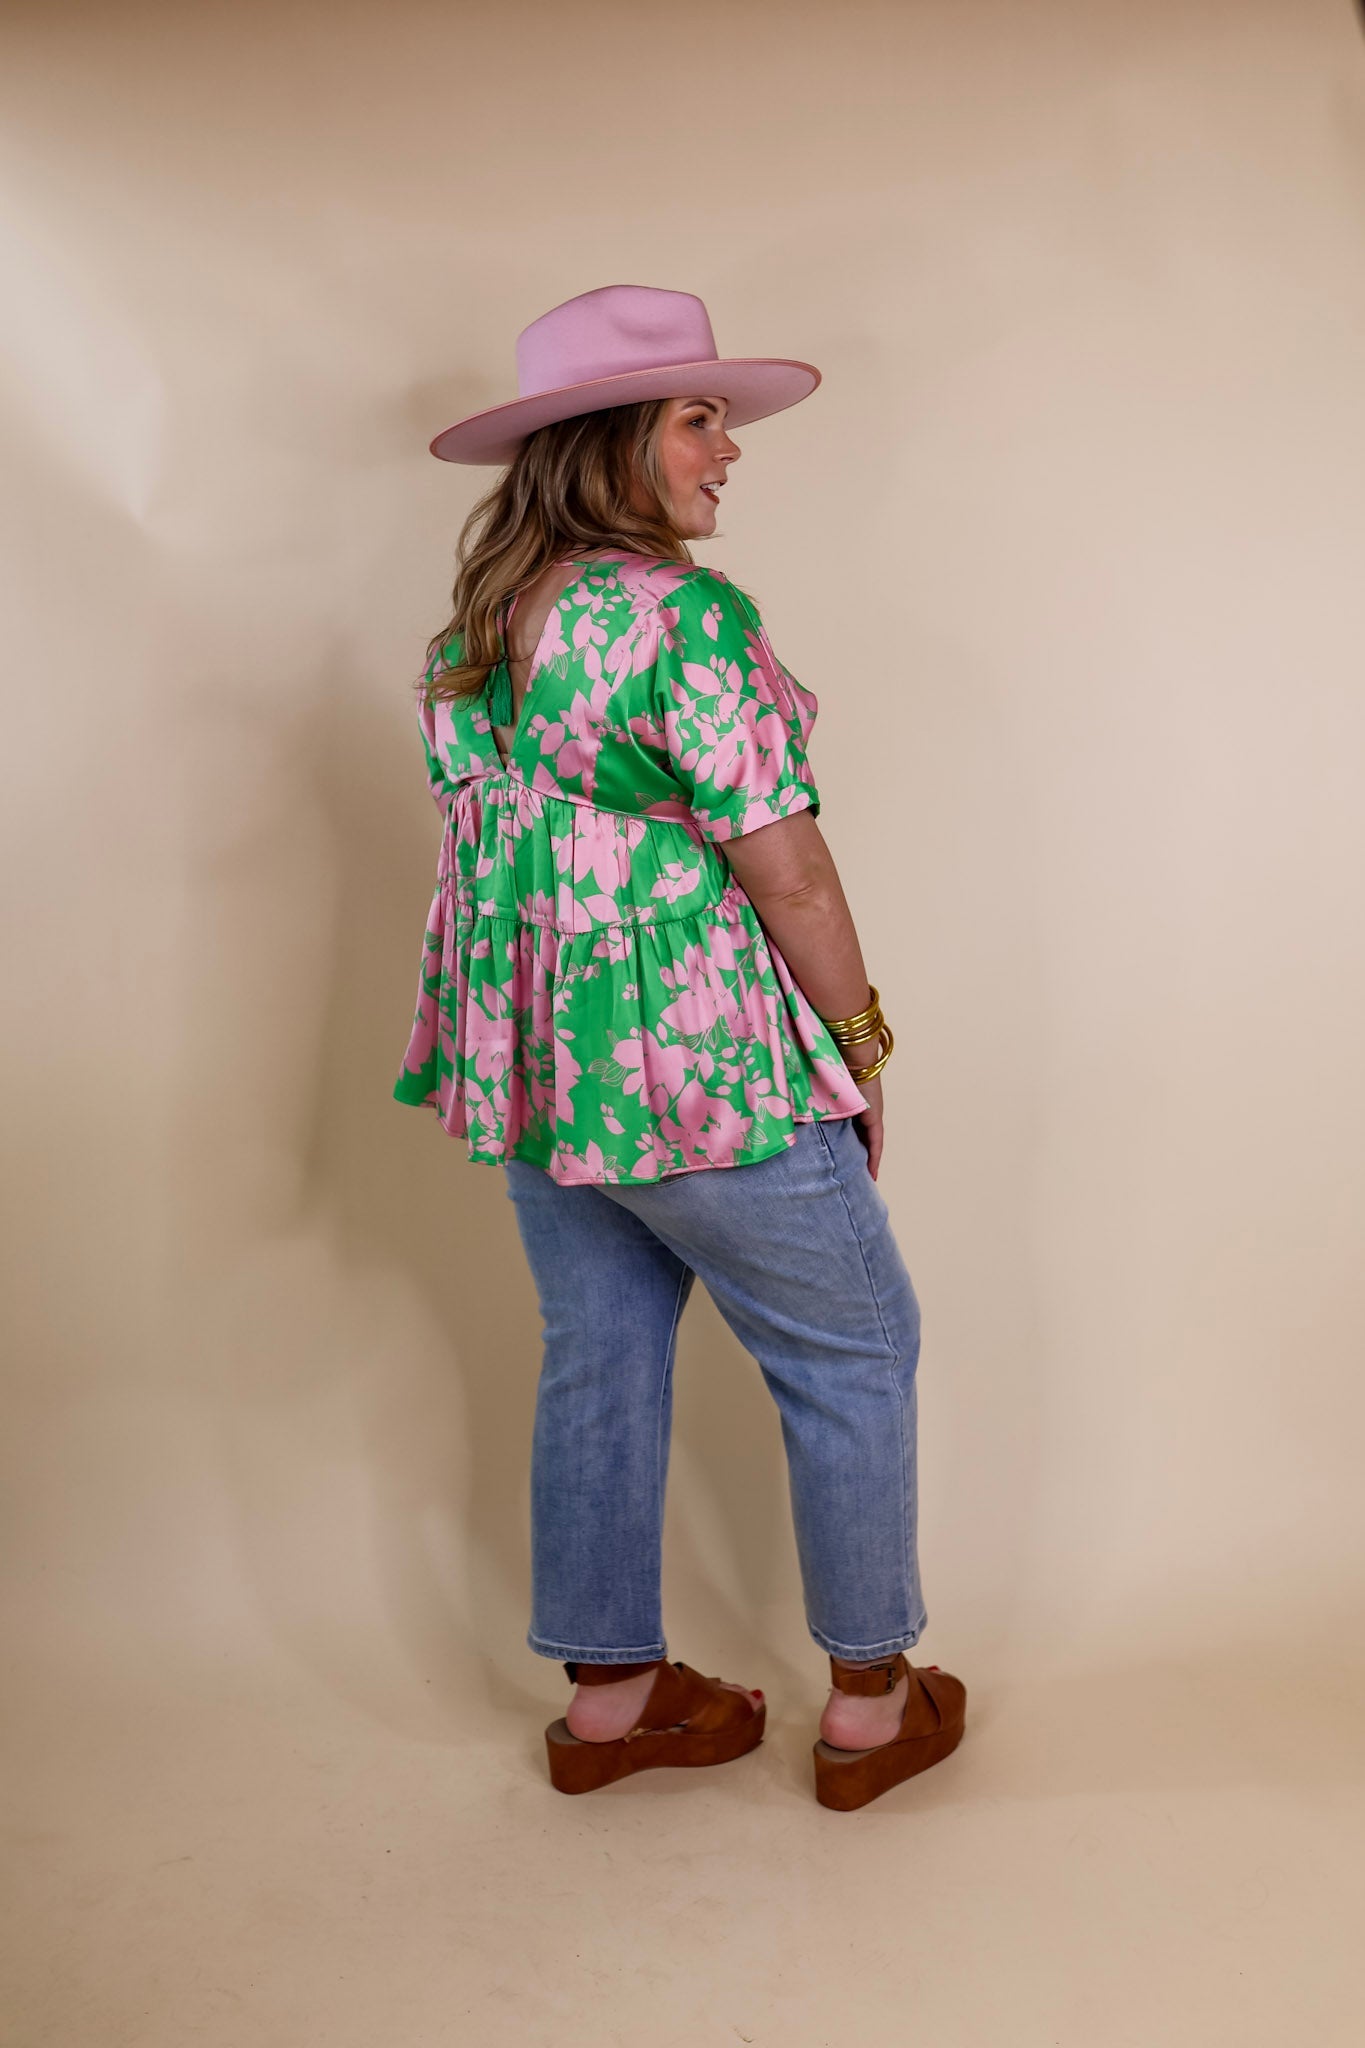 Merlot Meeting Floral Print V Neck Top in Green - Giddy Up Glamour Boutique